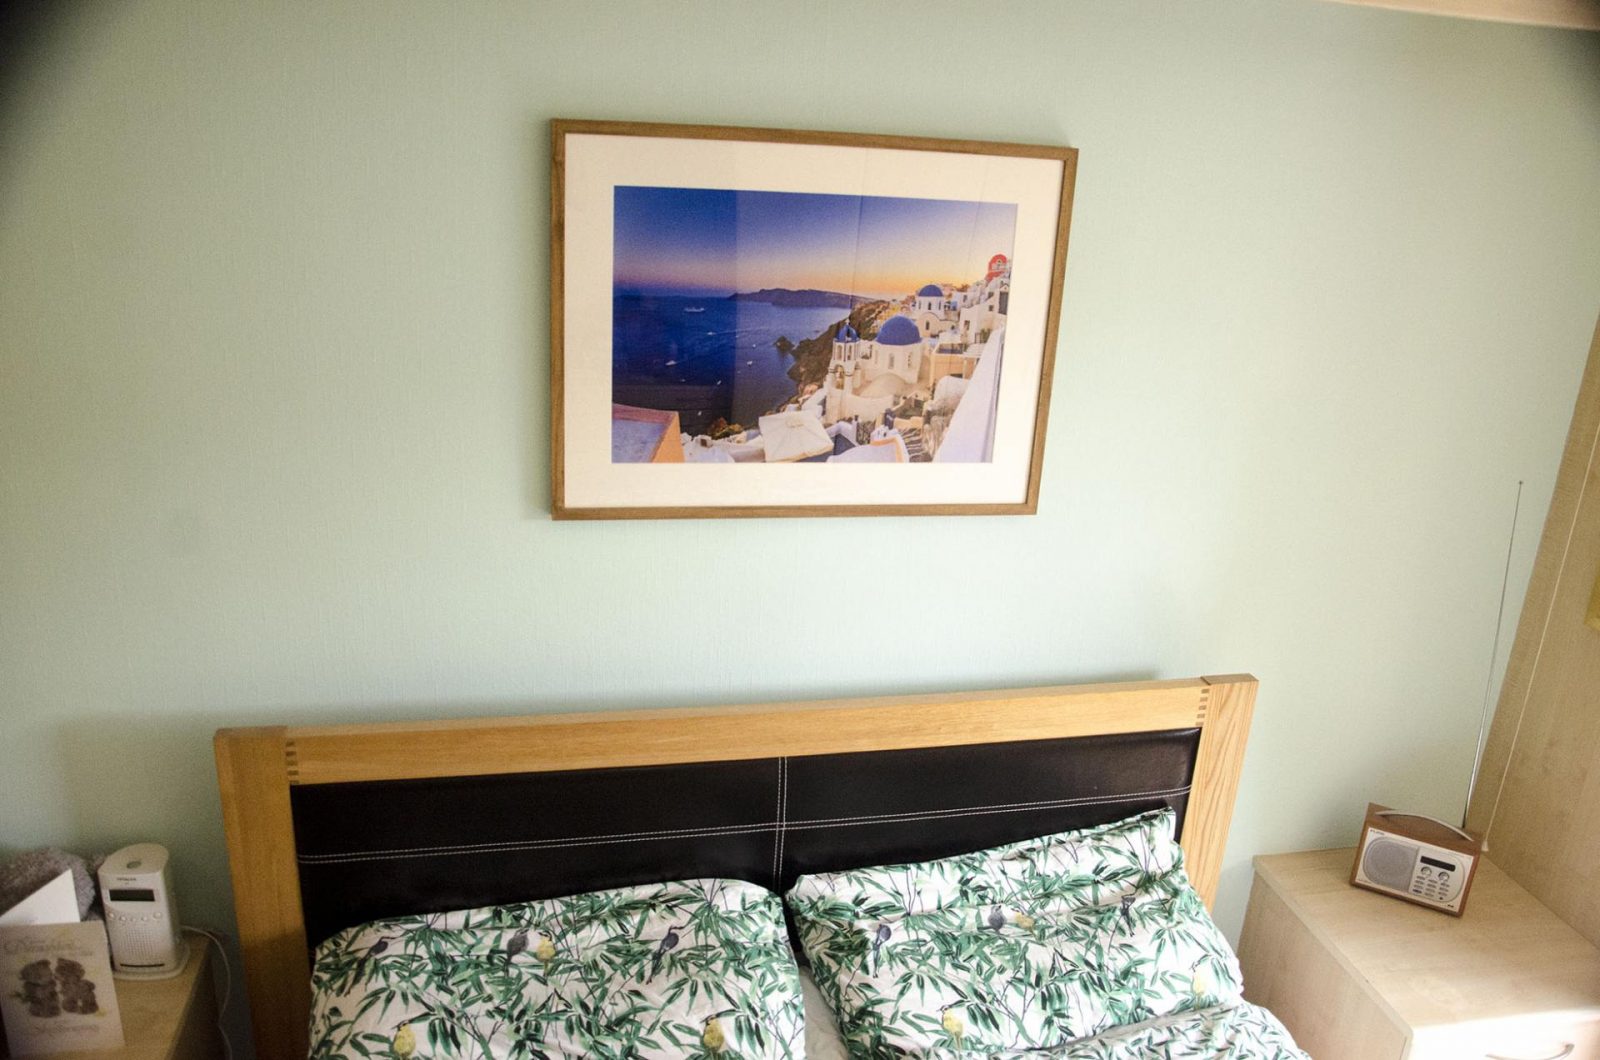 Santorini picture on the wall of a bedroom